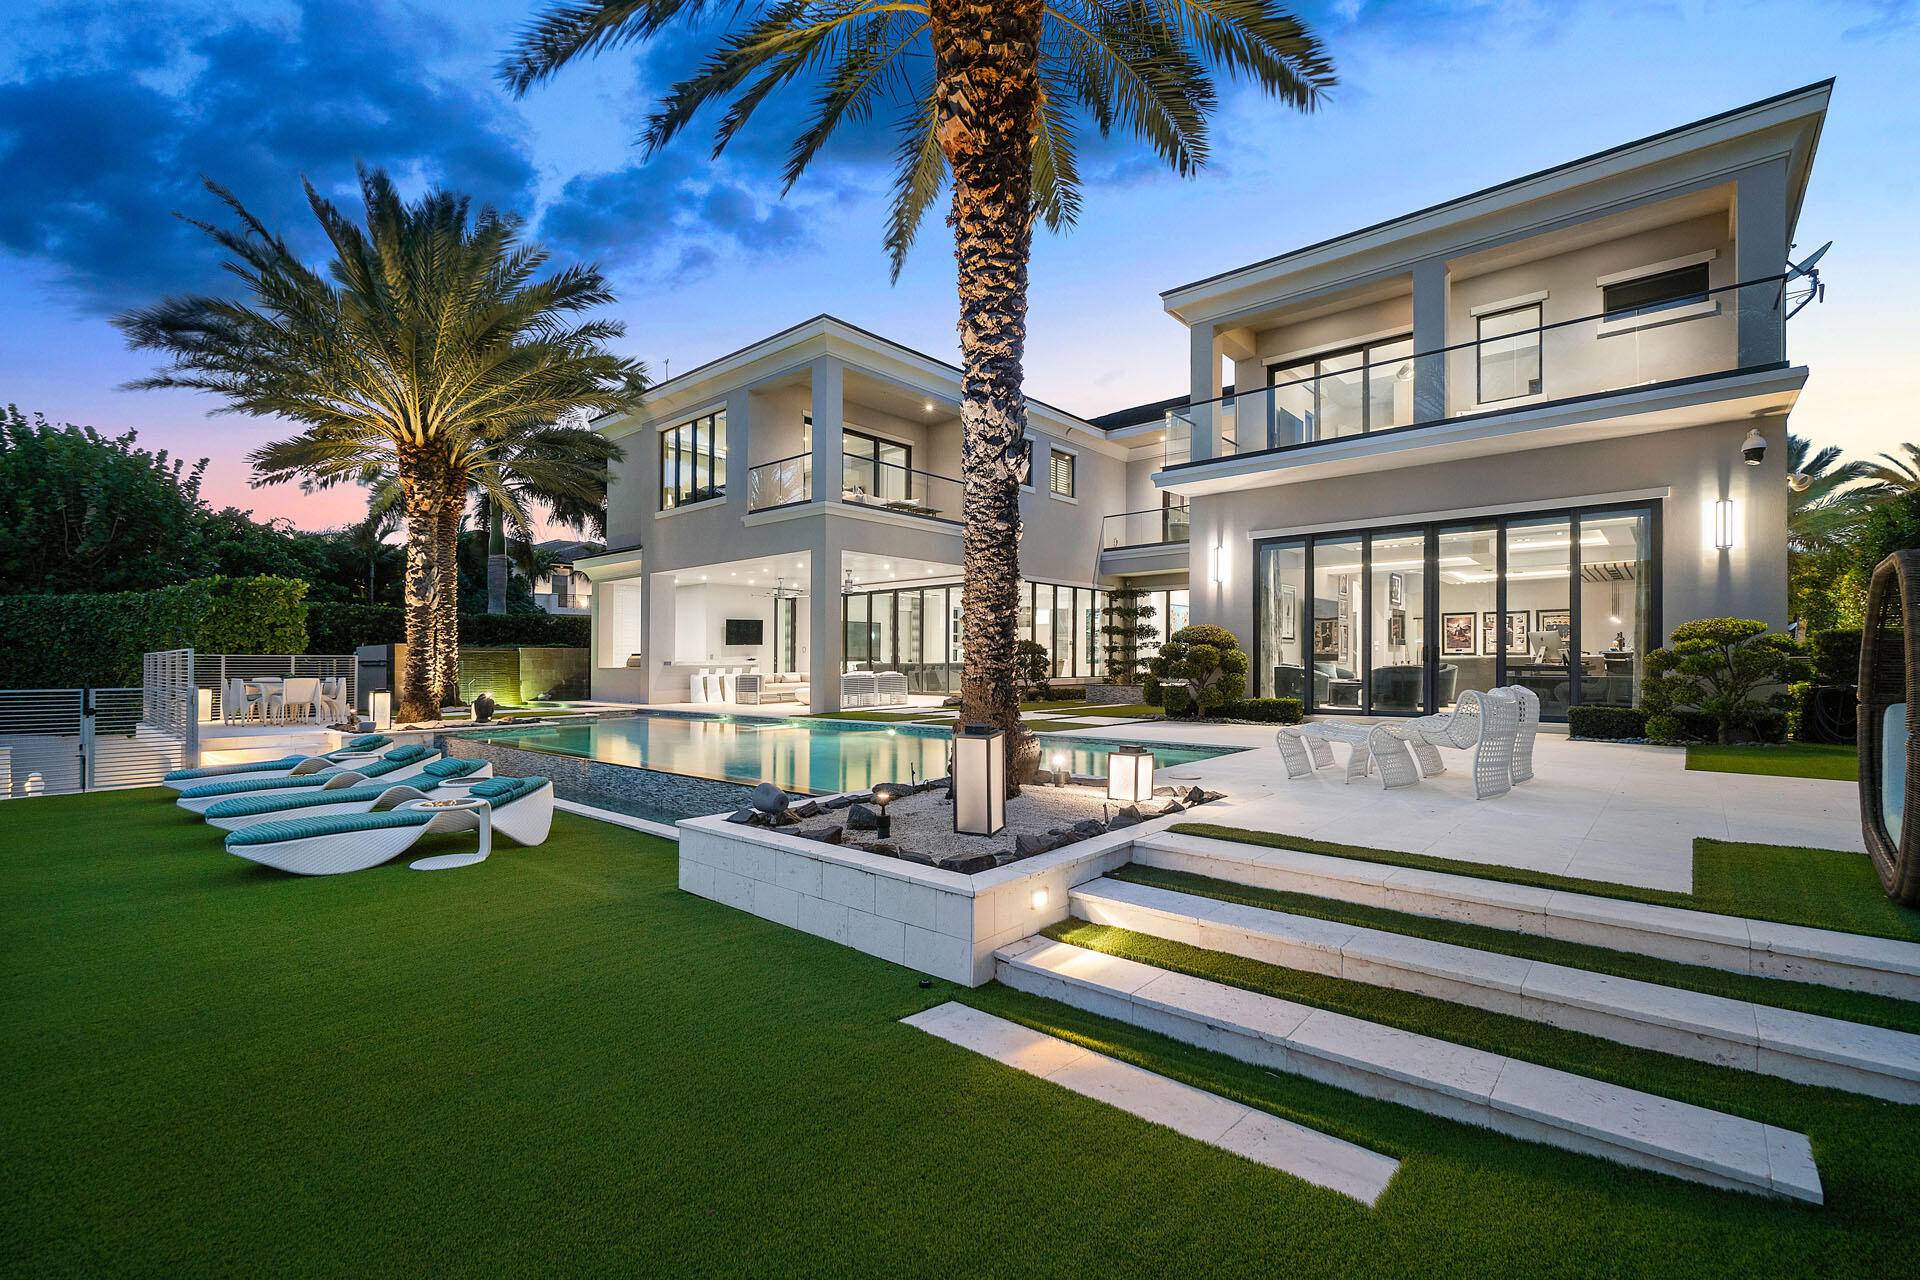 290 South Maya Palm Drive is a stunning 5 bedroom, 6.